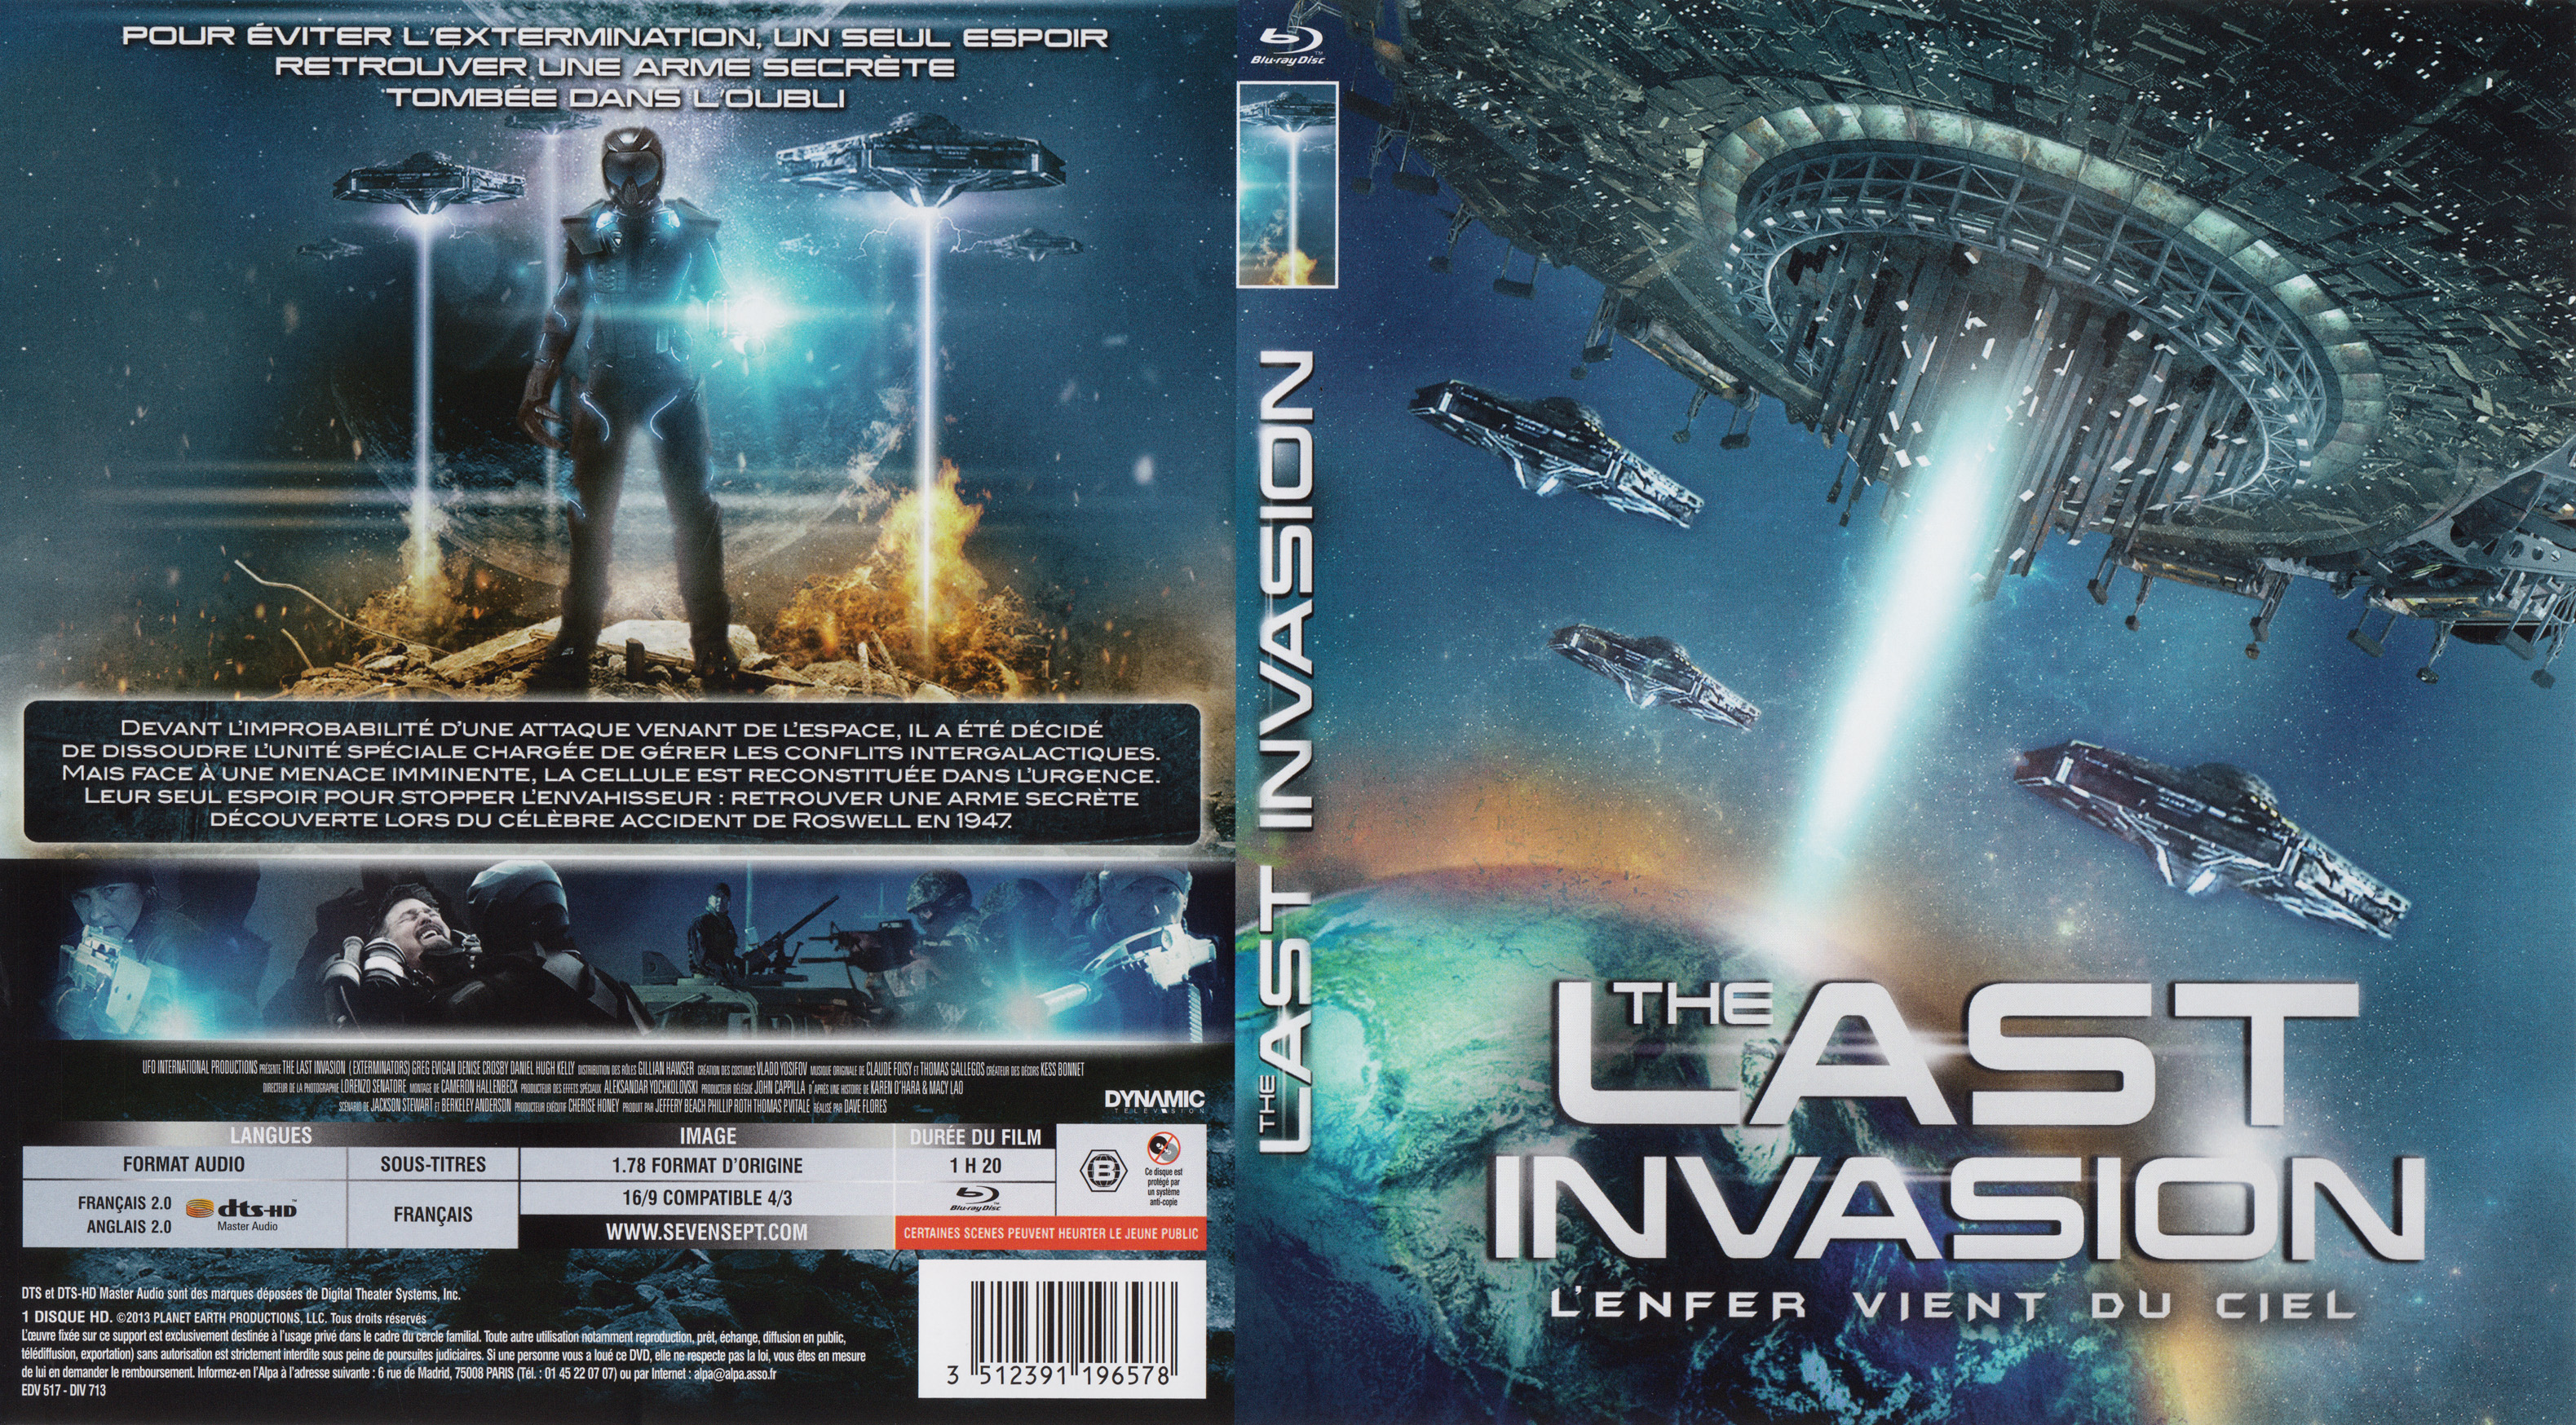 Jaquette DVD The last invasion (BLU-RAY)